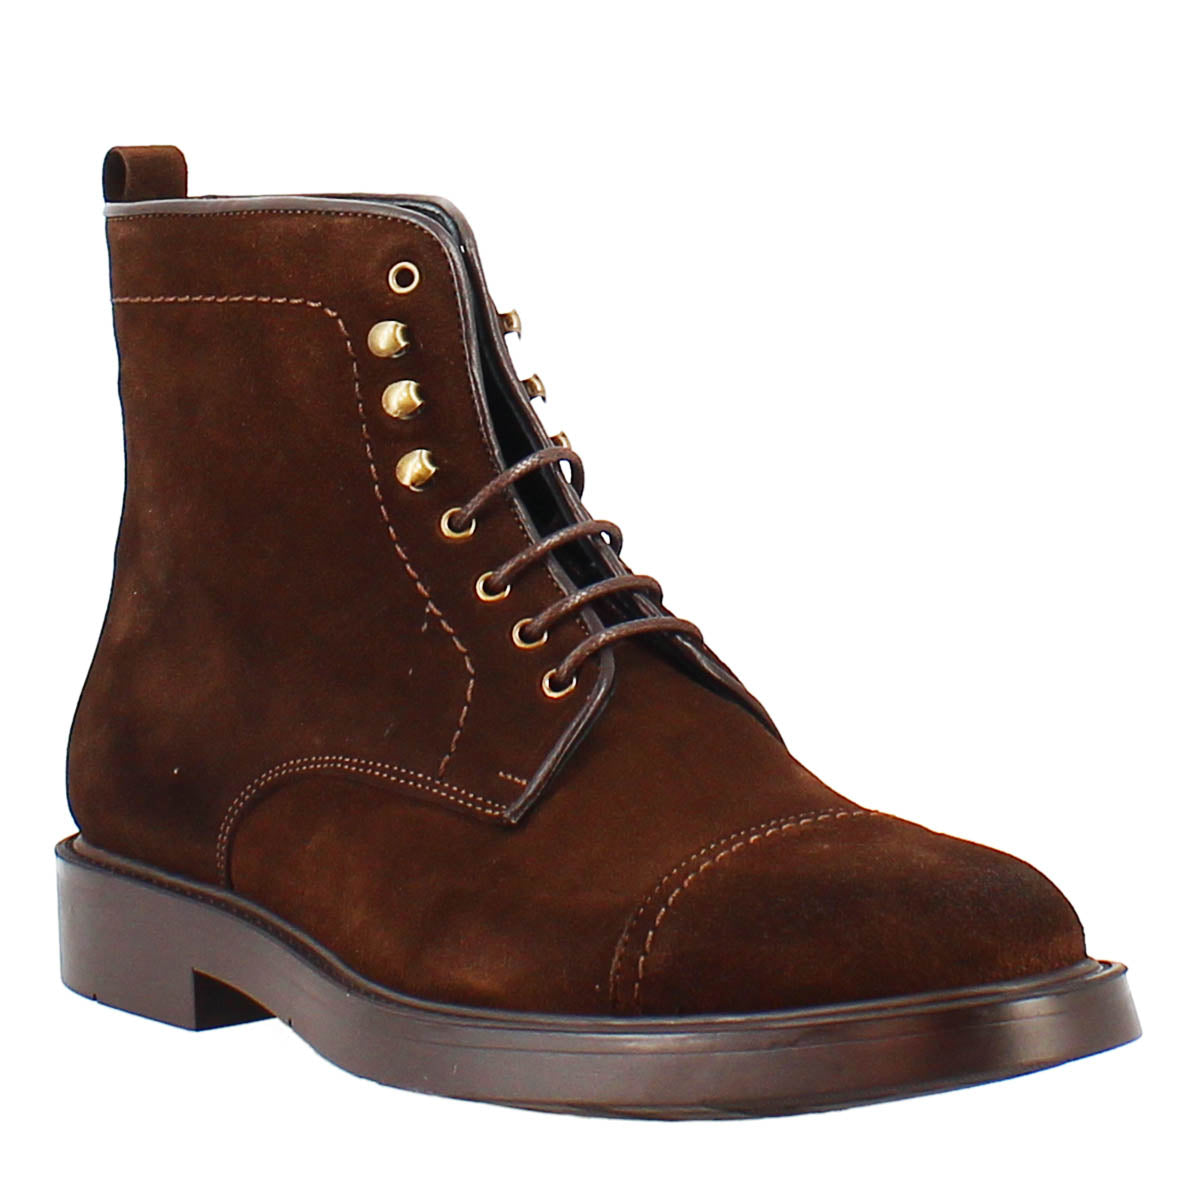 Brown suede ankle boot with rubber sole